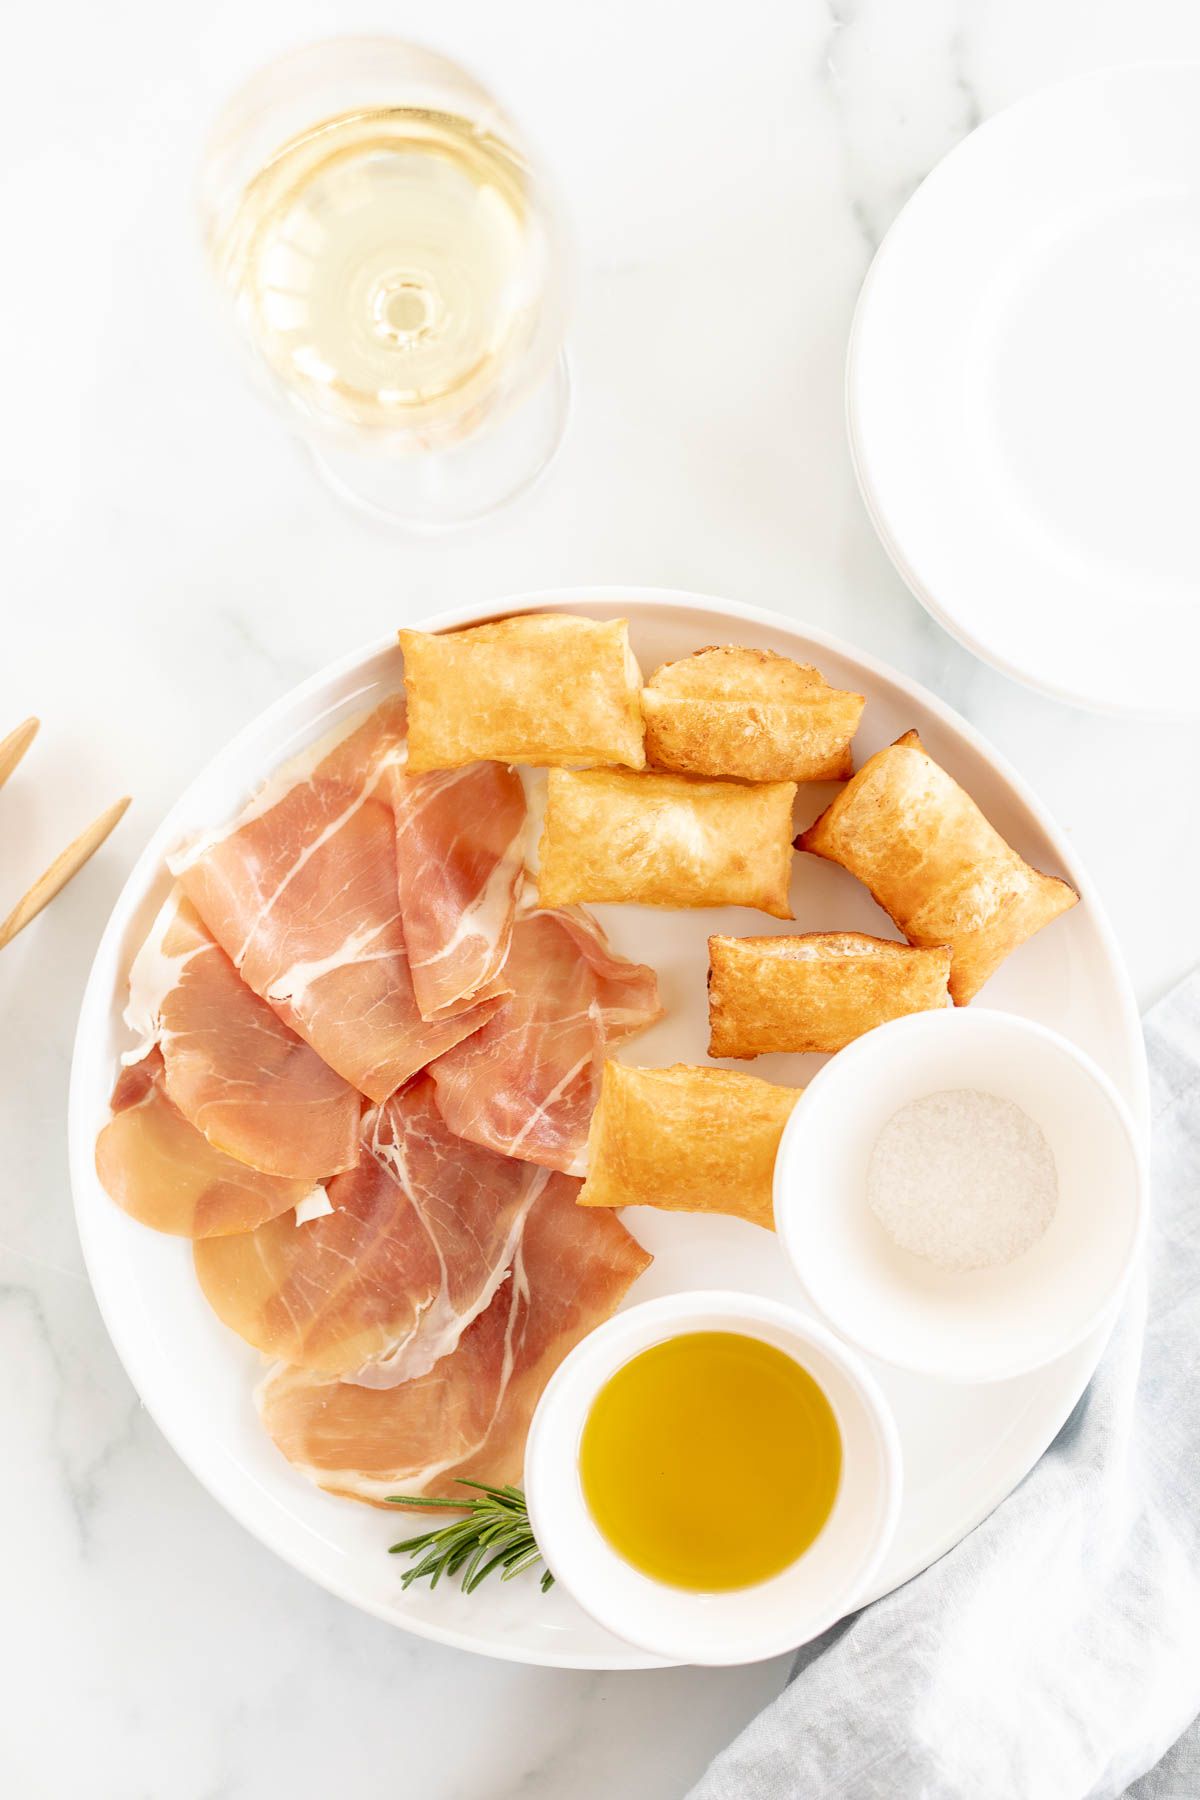 Gnocco fritto on a white plate with bowls of olive oil and sea salt to the side